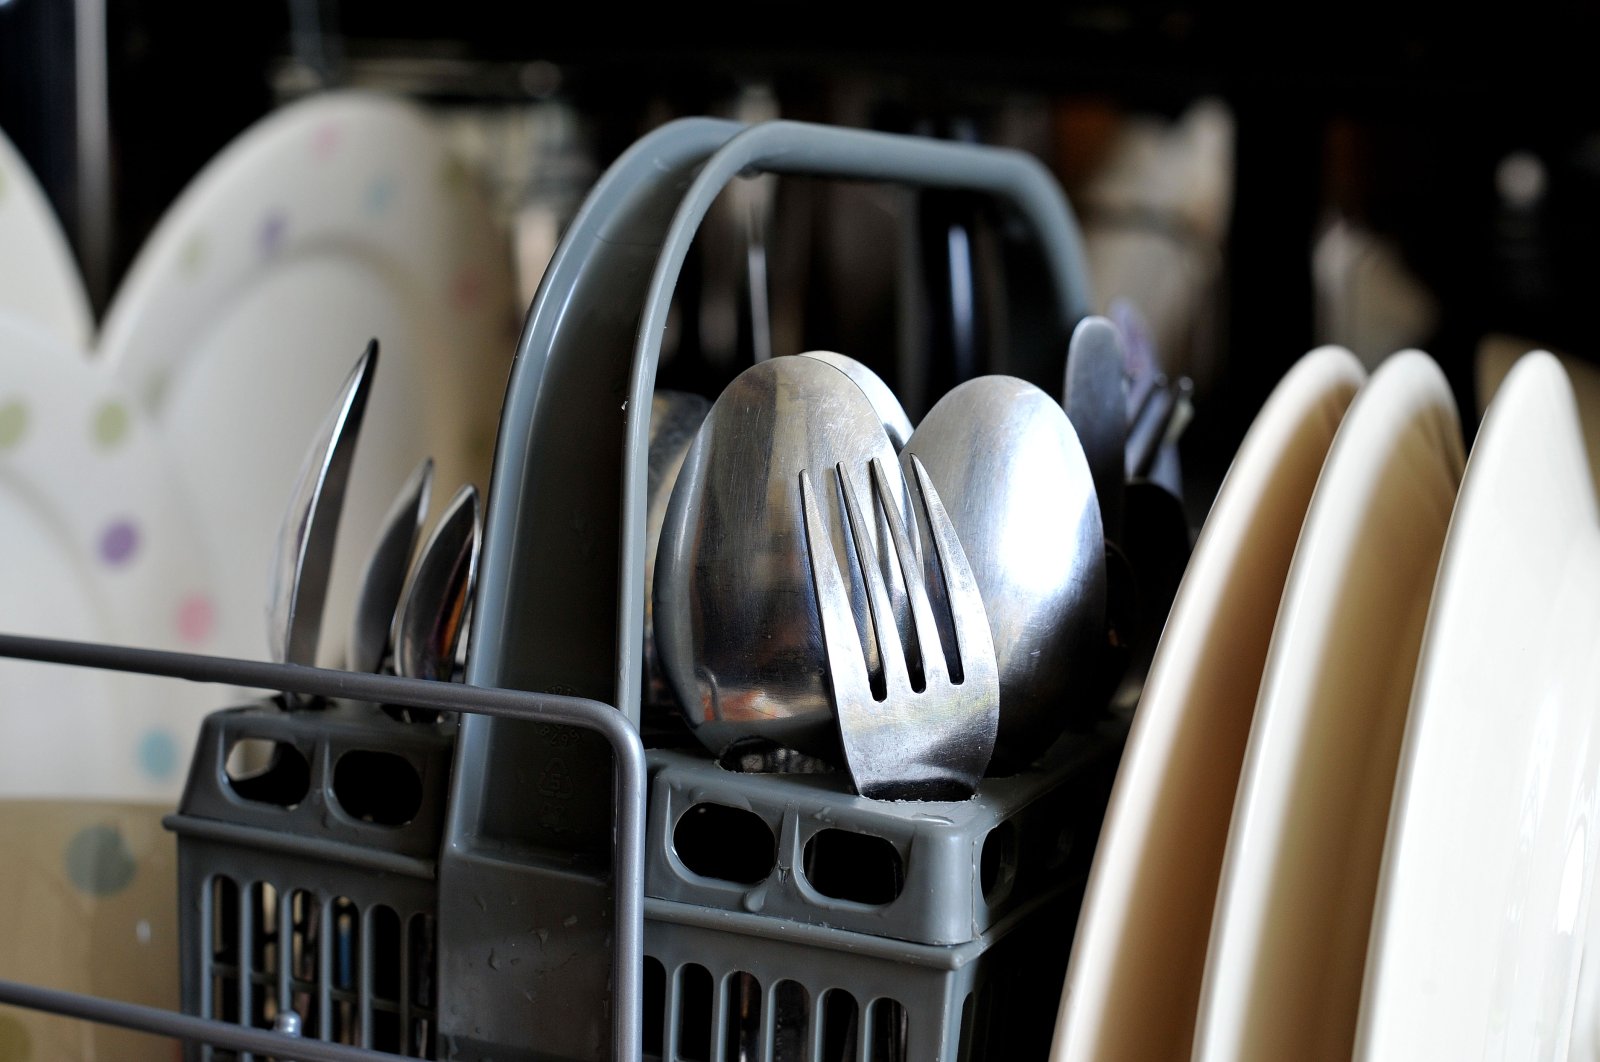 Dirty crockery and eating utensils wait to be washed in a dishwasher. (Reuters File Photo)